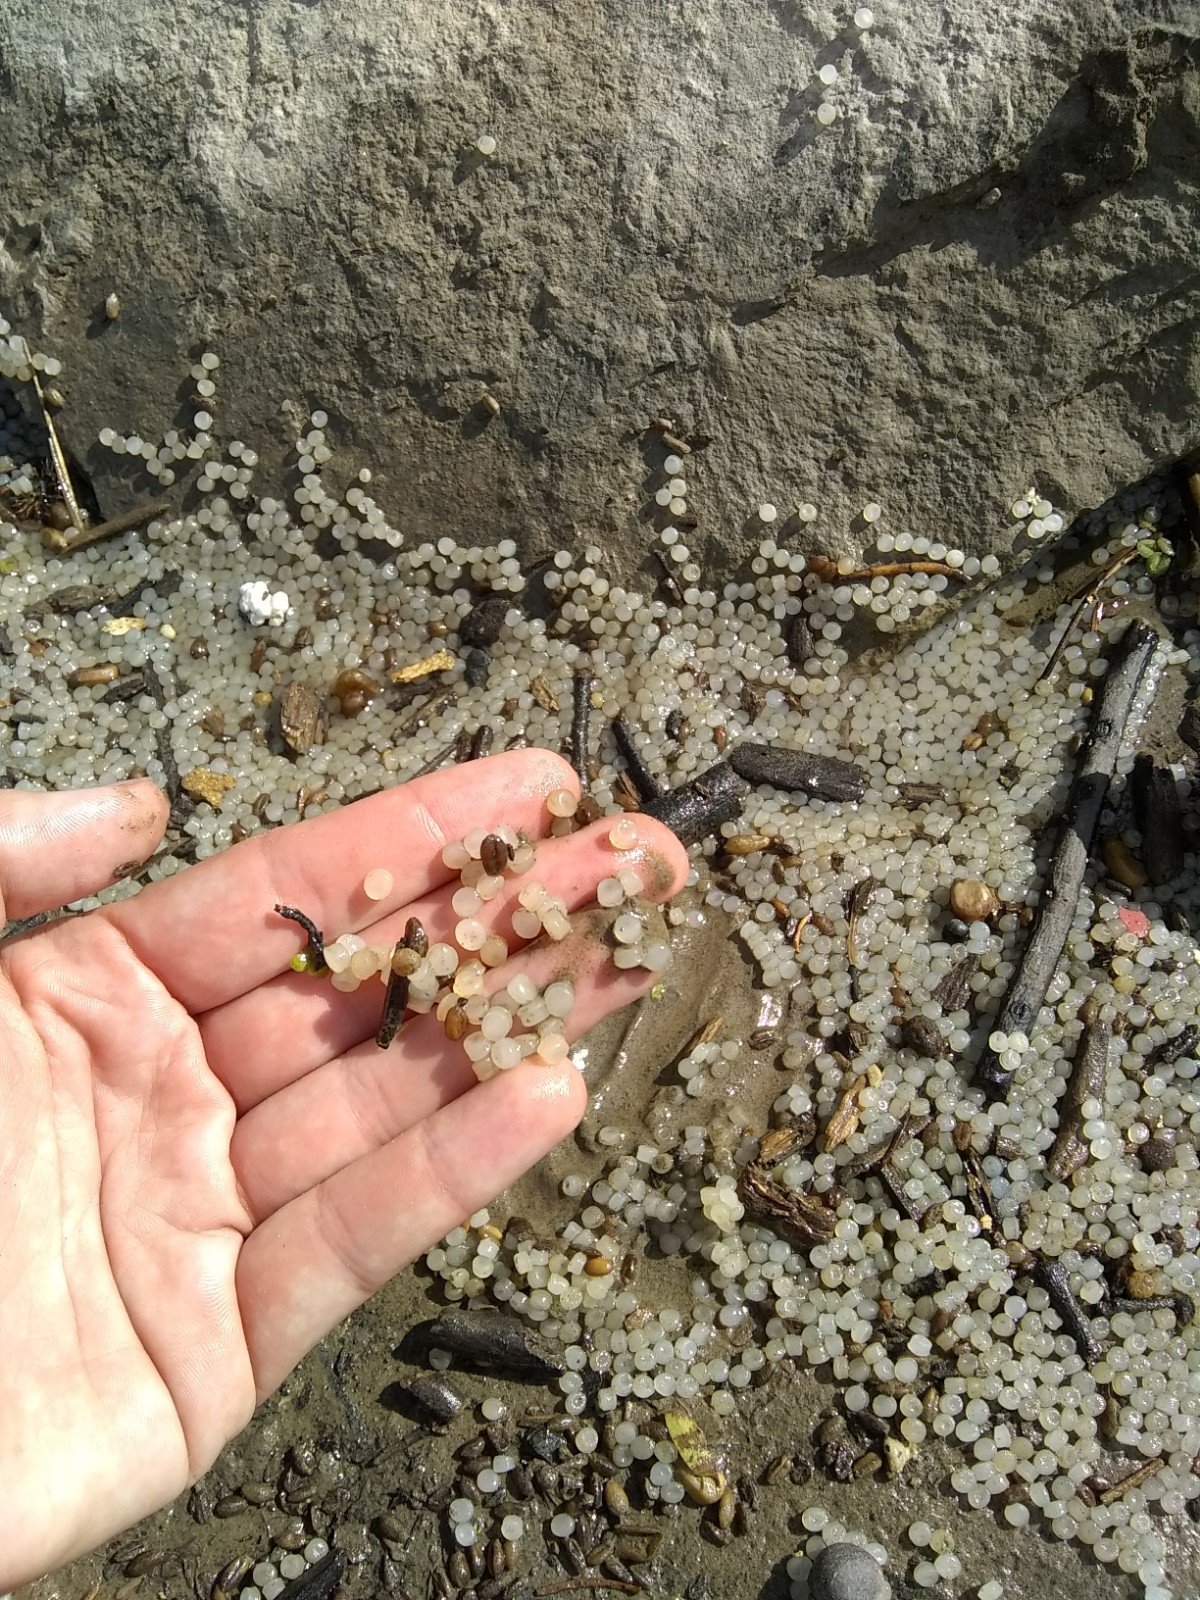 Copy of sticky nurdles in hand marchio.jpg